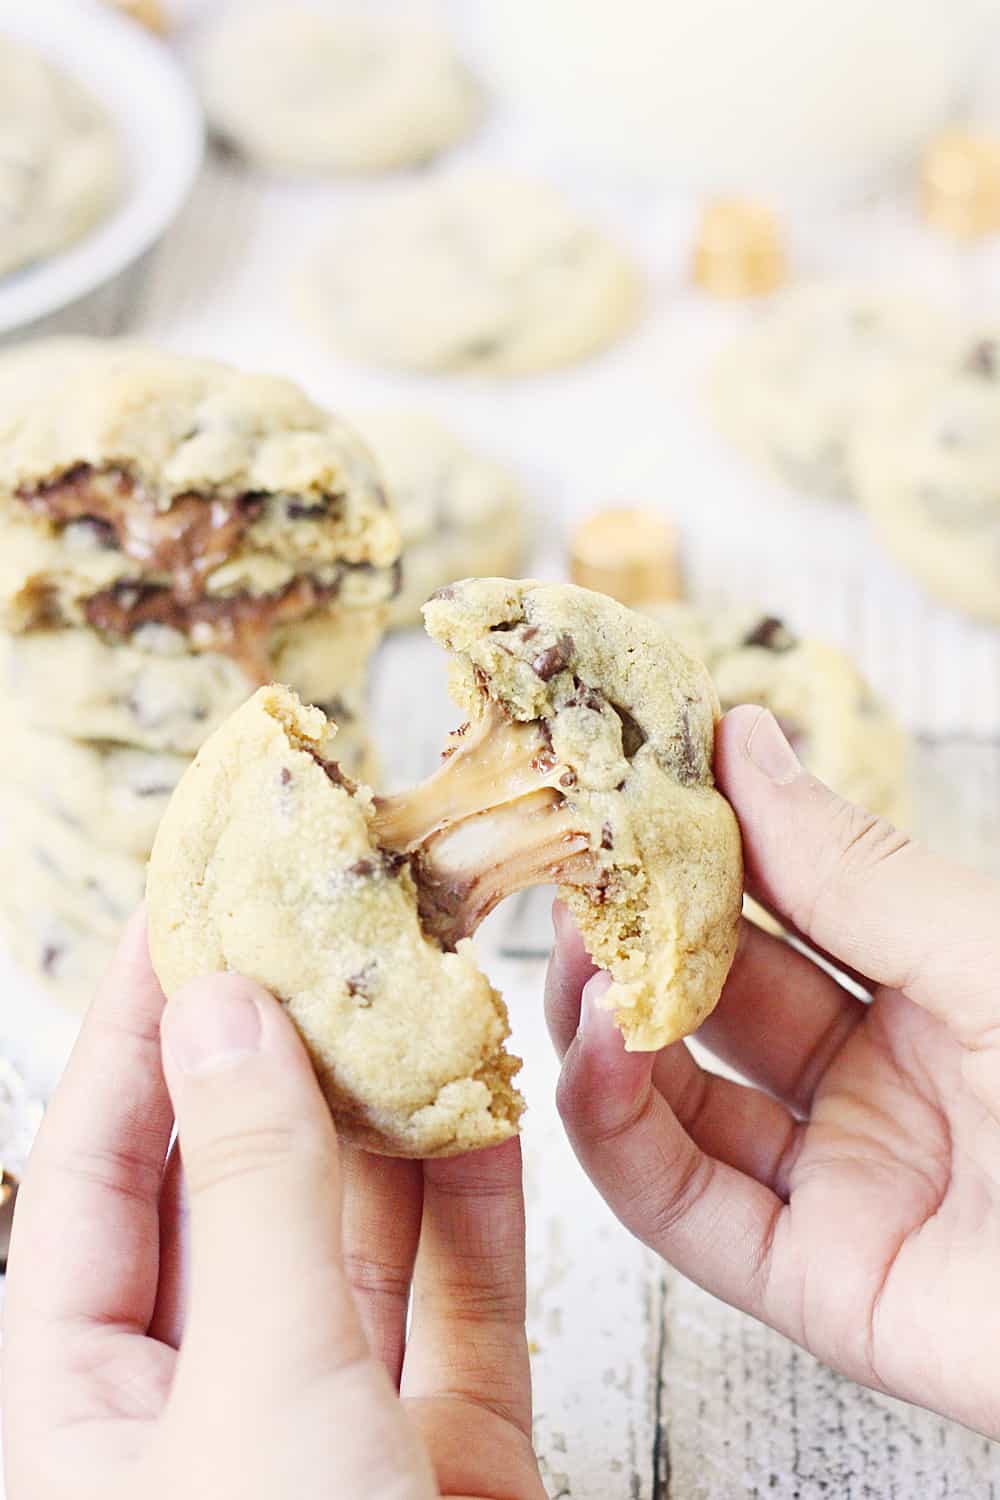 Chocolate Chip Rolo Cookies - Chocolate chip Rolo cookies feature a soft, chewy chocolate chip cookie filled with an ooey, gooey Rolo center. These Rolo cookies will make you rethink the classic recipe! #cookies #halfscratched #rolo #rolocookies #dessert #easyrecipe #cookierecipe #chocolate #cookiedough #baking